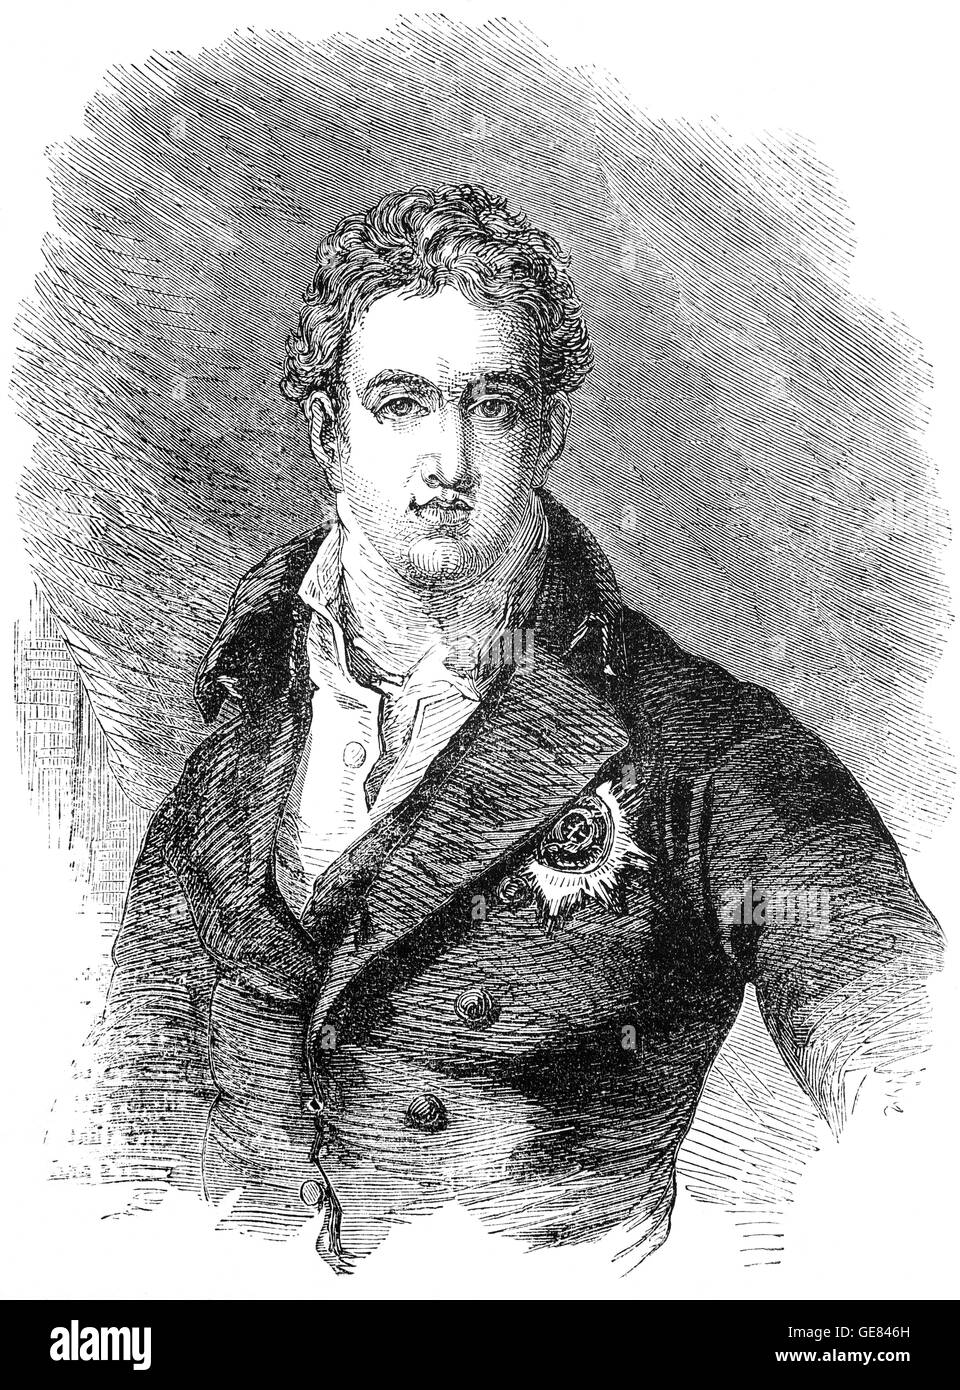 Robert Stewart, 2nd Marquess of Londonderry, (1769 – 1822), usually known as Lord Castlereagh,  an Anglo-Irish statesman. As Chief Secretary for Ireland, he was involved in putting down the Irish Rebellion of 1798 and was instrumental in securing the passage of the Irish Act of Union of 1800. From 1812, he became British Foreign Secretary, and was central to the management of the coalition that defeated Napoleon Stock Photo